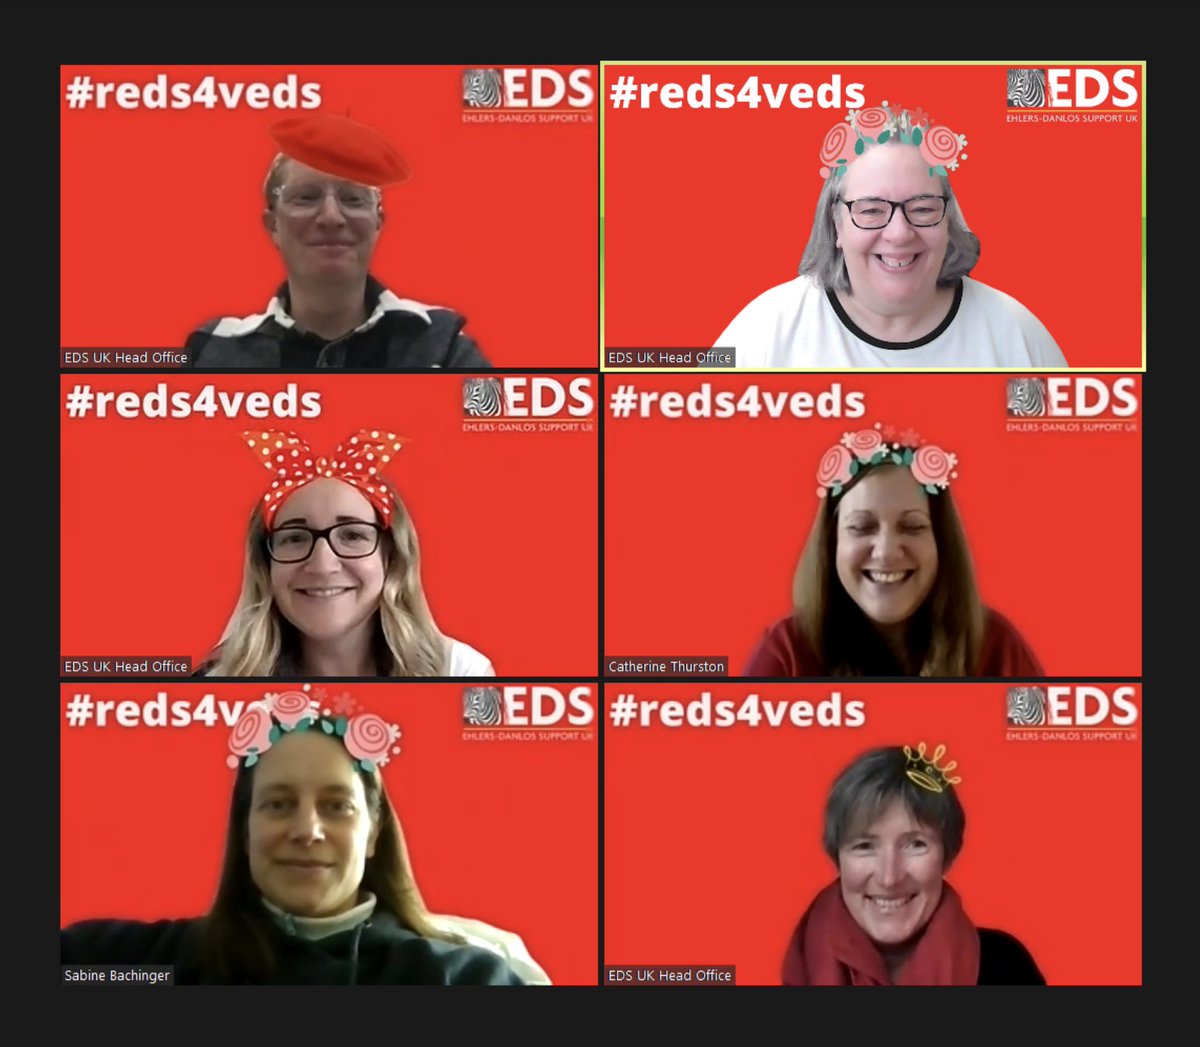 Show your support today for the #REDS4VEDS campaign! We're asking supporters to wear red and help to raise awareness of vascular Ehlers-Danlos syndrome (vEDS).

Wear red today, take your selfie & post it on your social channels using the #reds4veds hashtag to show your support!